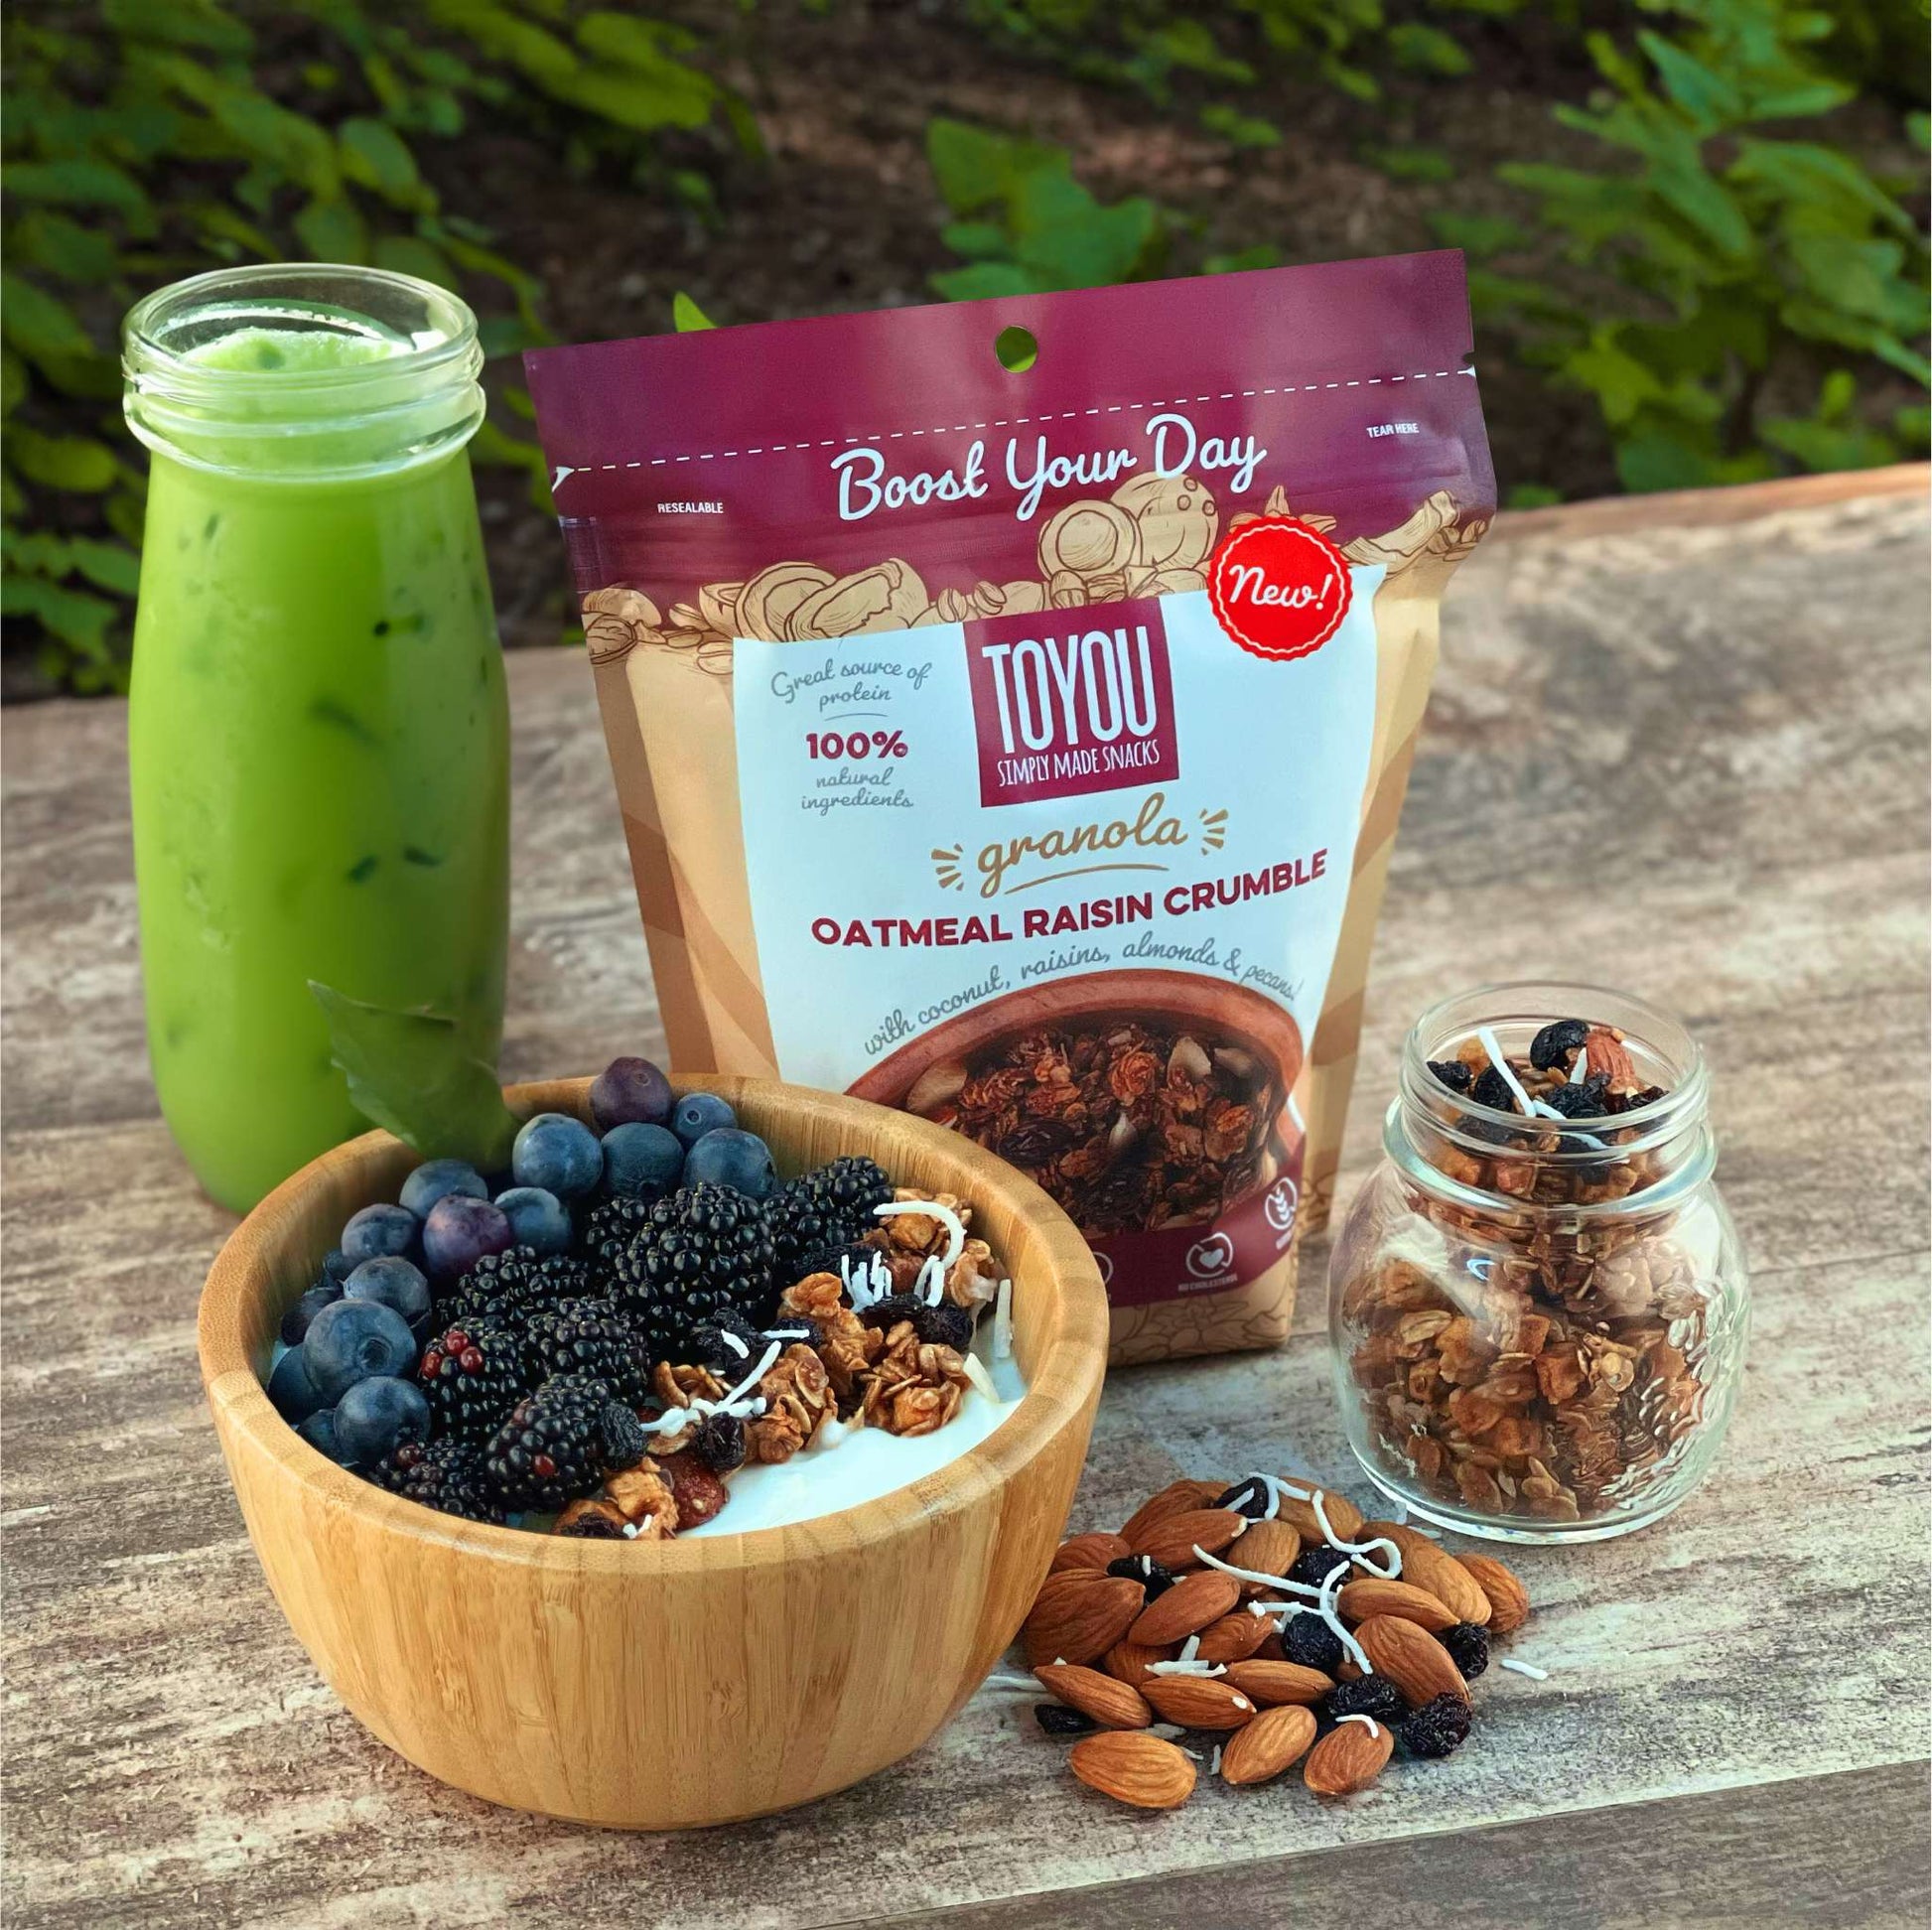 Isometric view: Purple granola pouch on wood surface with forest like background (Artwork: Wooden bowl with yogurt, blueberries, blackberries, shredded coconut, Oatmeal Raisin Crumble ToYou Granola) Behind: Tall clear glass with green juice. Front right: 